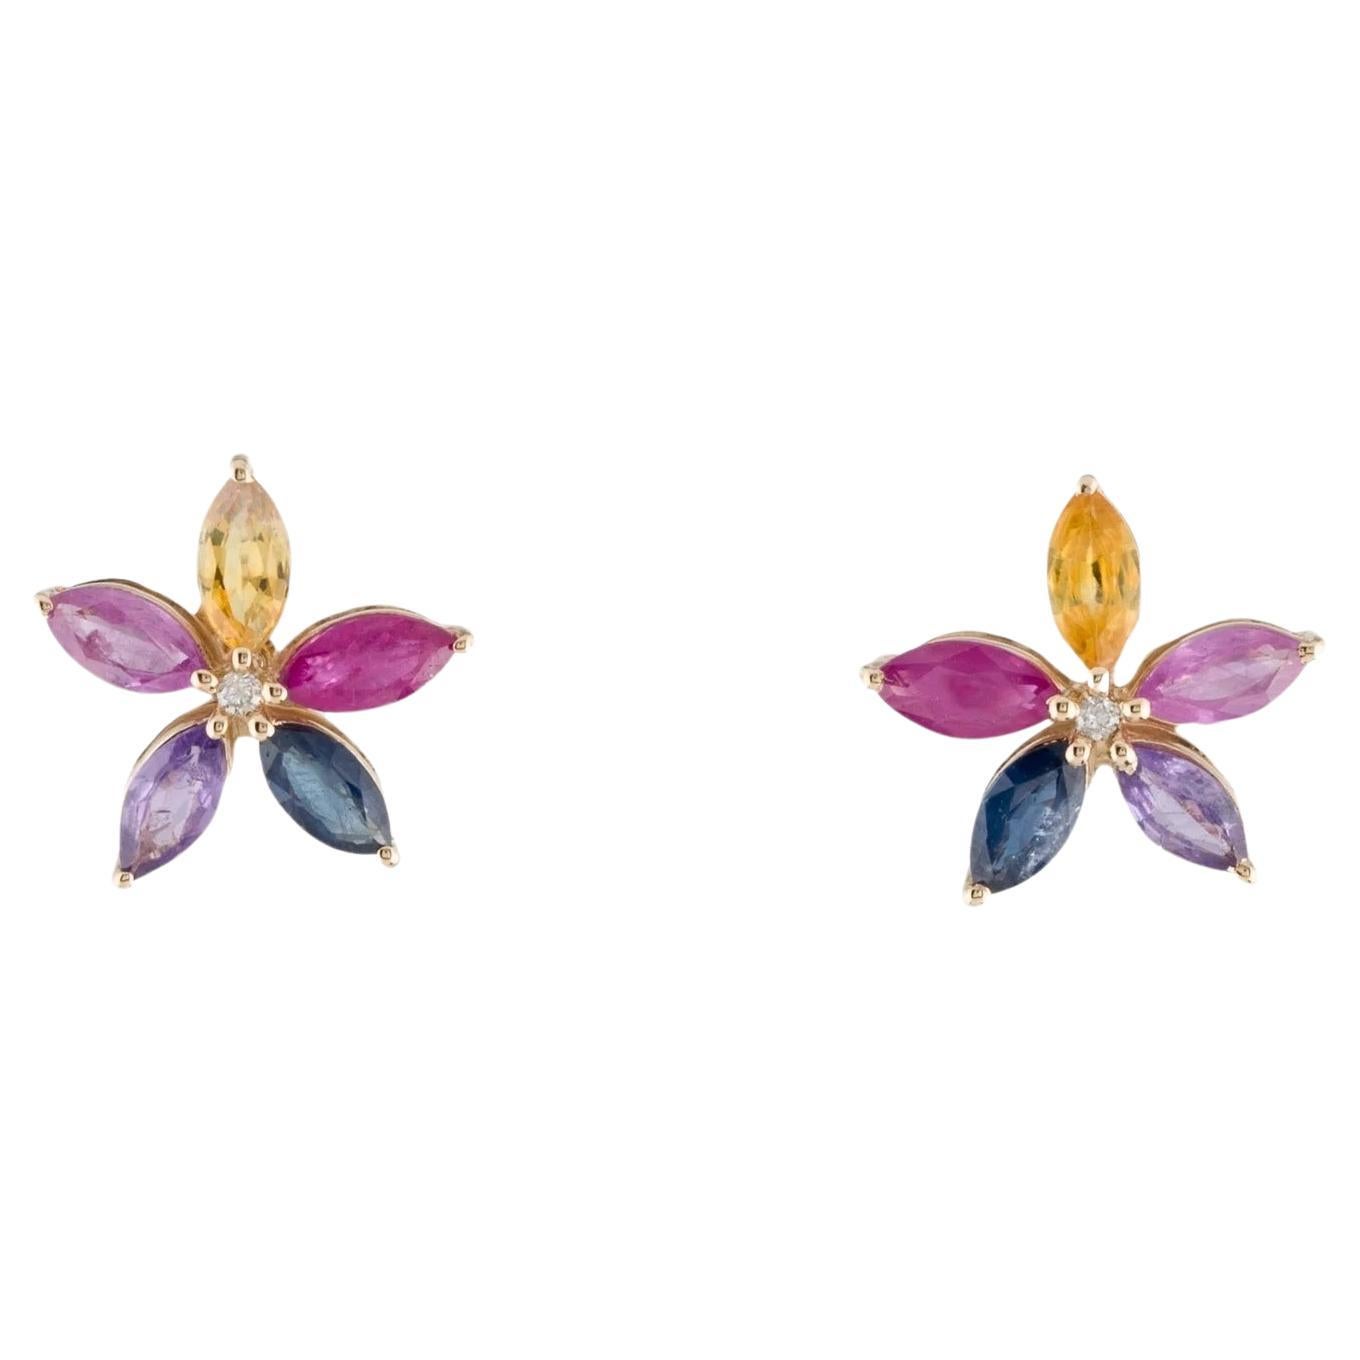 Radiant 14K Yellow Gold Earrings with Multi-Colored Sapphire and Diamonds